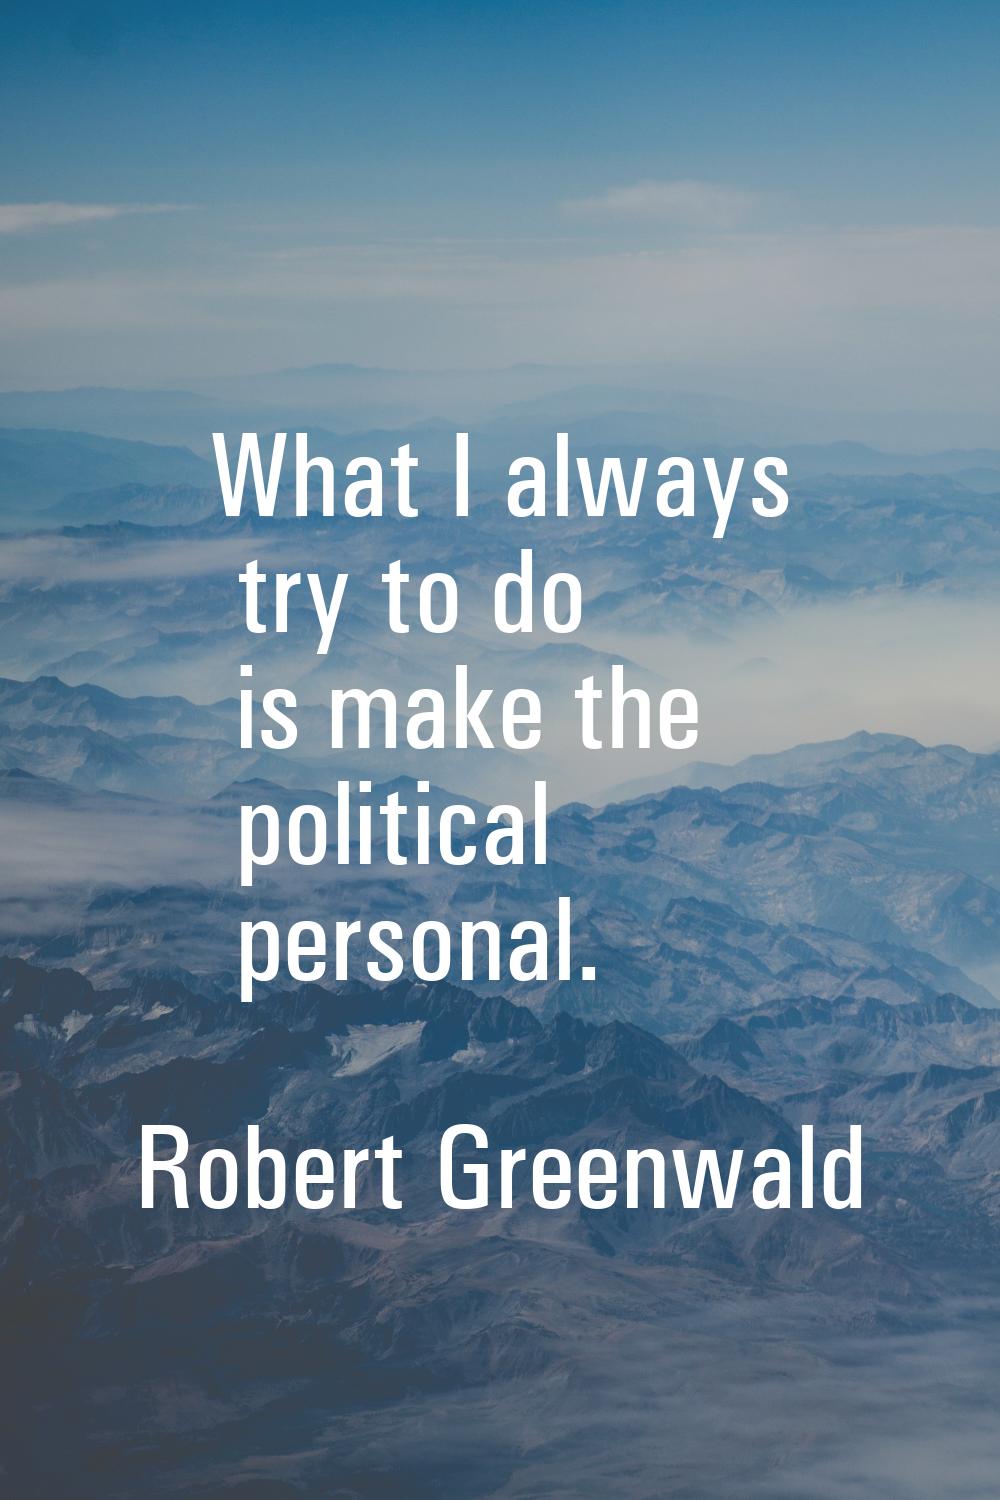 What I always try to do is make the political personal.